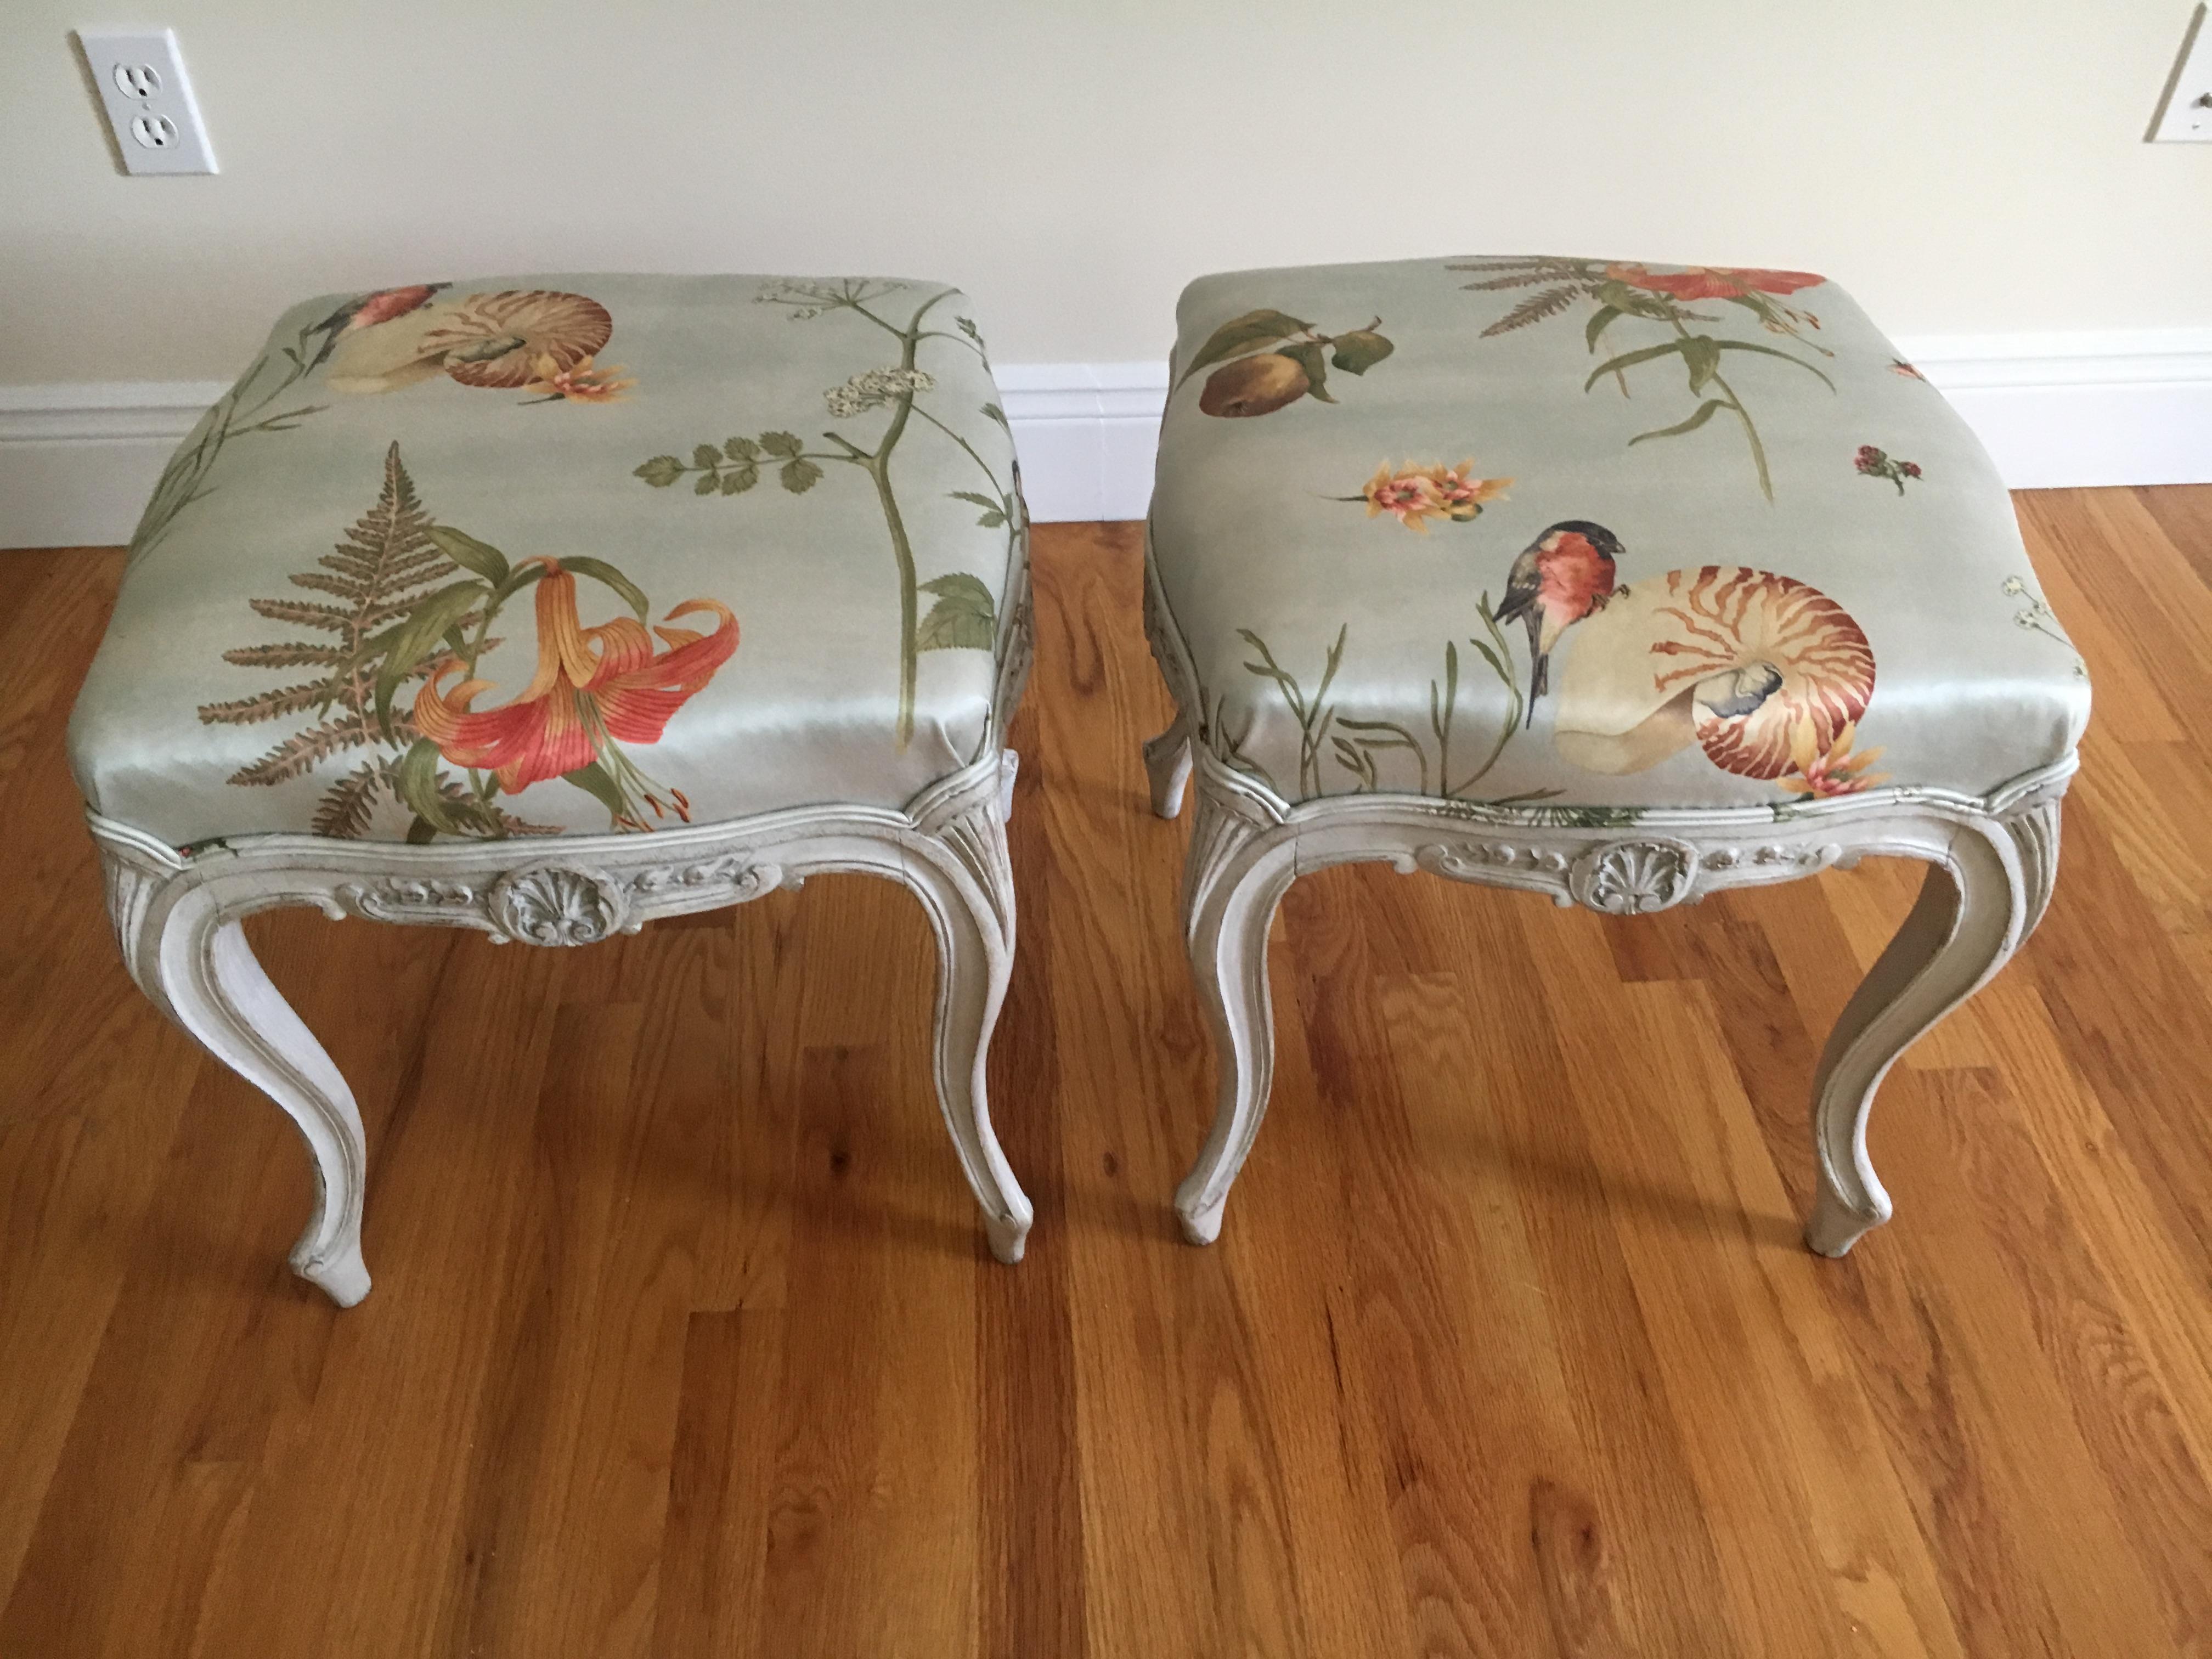 Beautiful pair of good sized Danish painted wood Rococo style stools from the 1930s, carved and having a scallop motif. Newly upholstered in the delightfully whimsical Bullfinch & Nautilus silk or cotton blend by Scalamandre. Ready for installation.